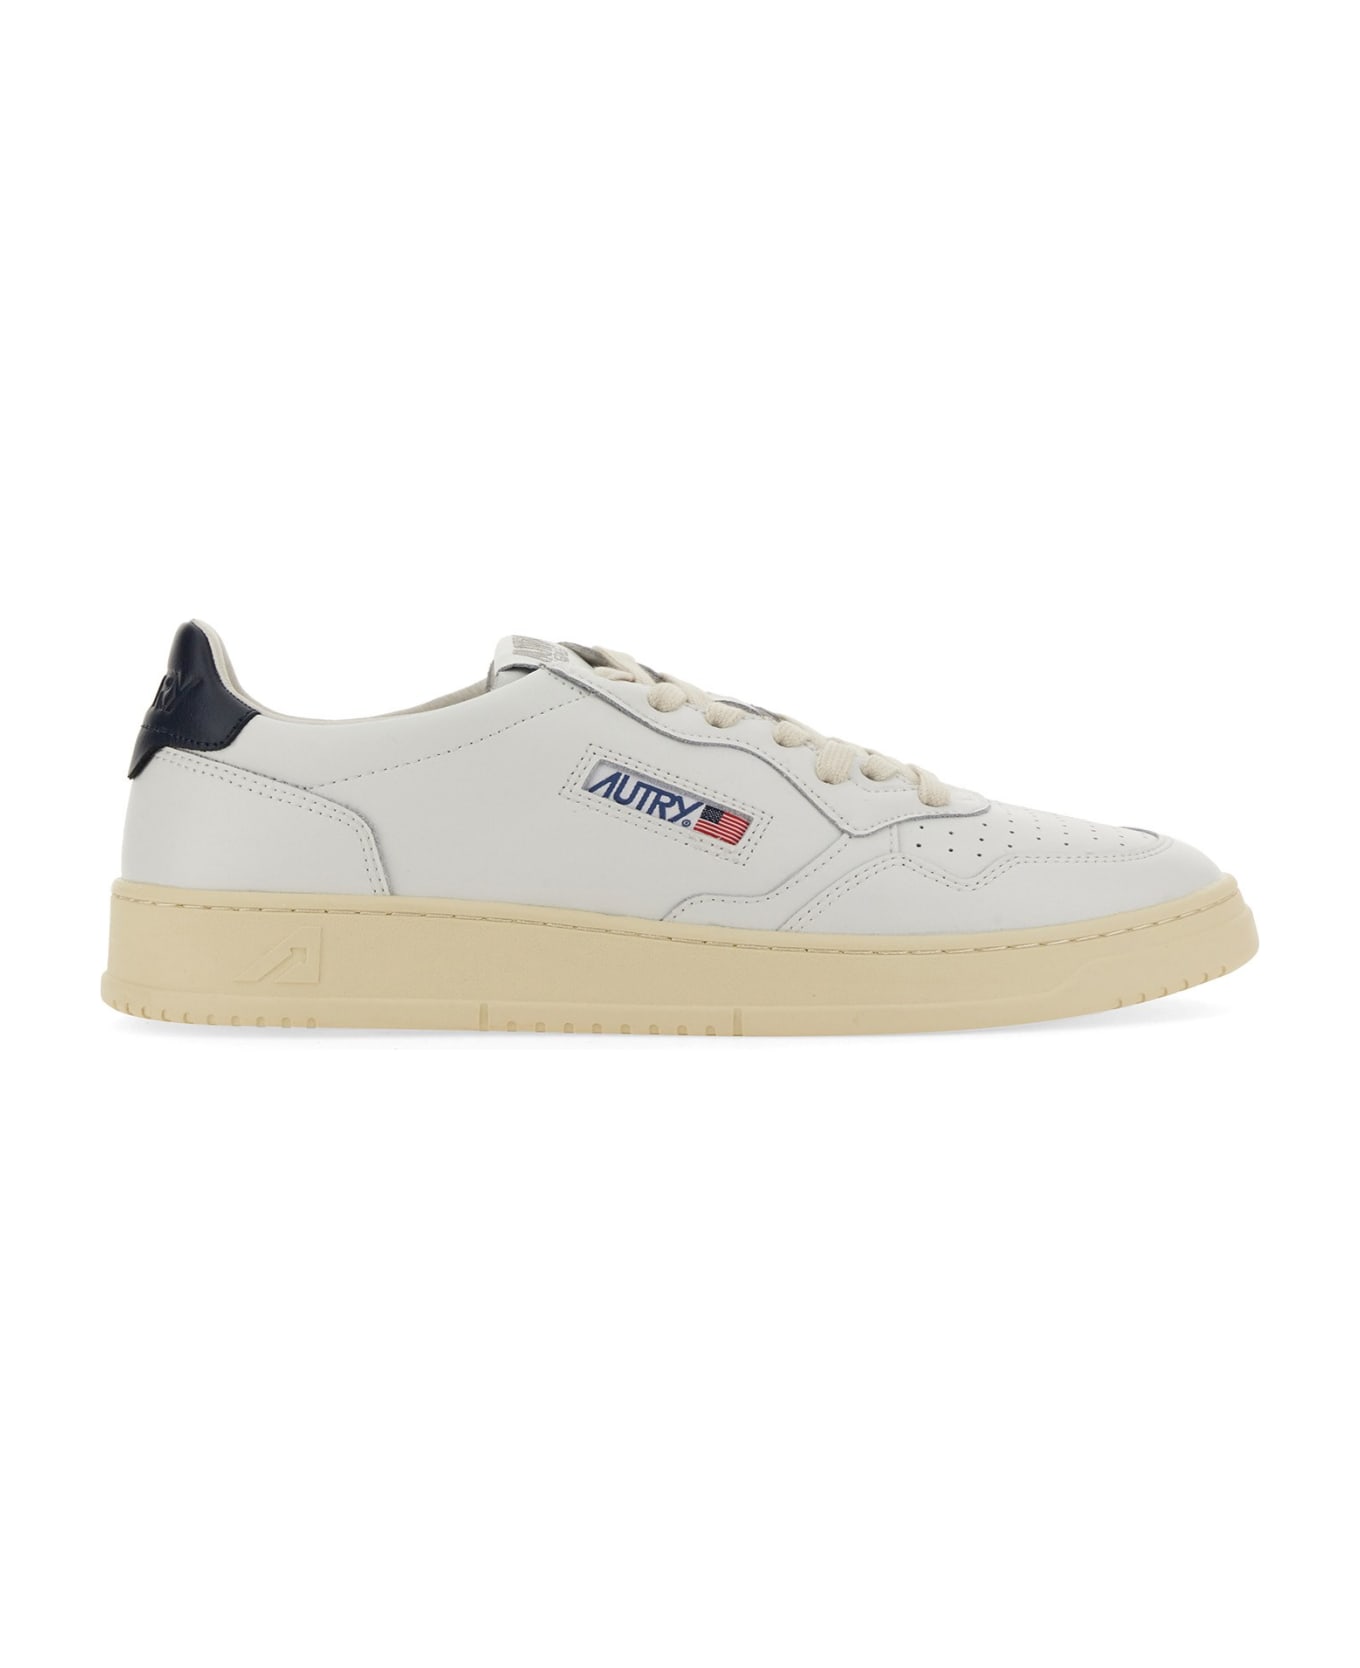 Autry Medalist Low Sneakers In White And Navy Blue Leather - Bianco